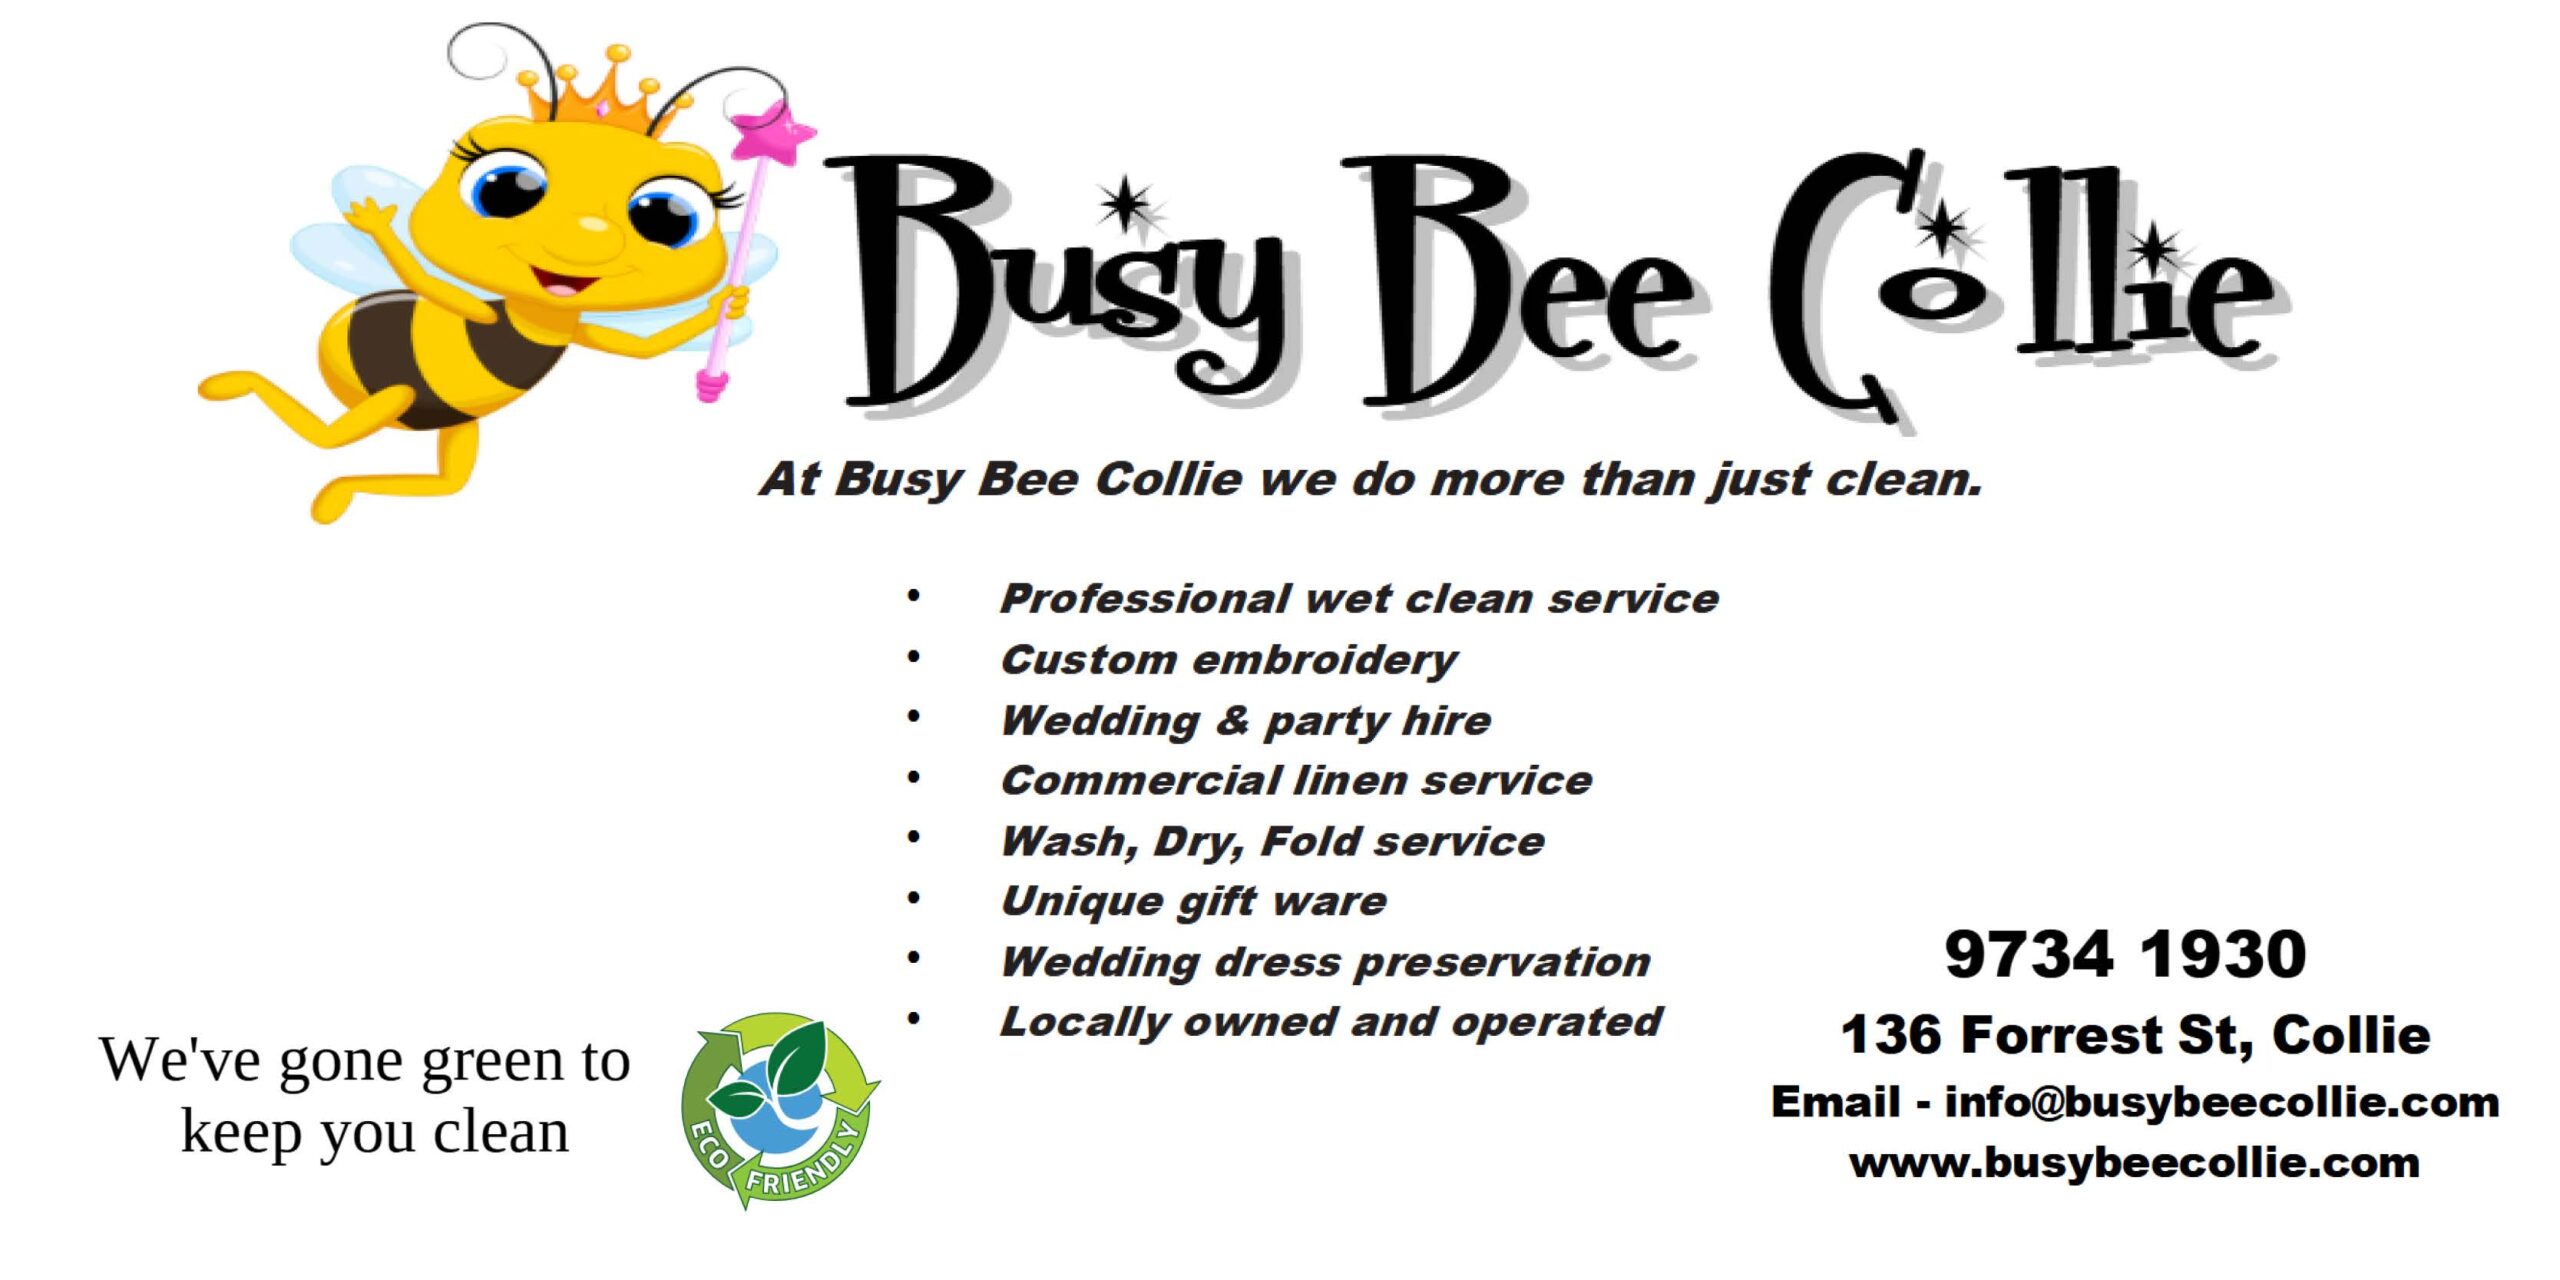 Collie Hub - Busy Bee Collie